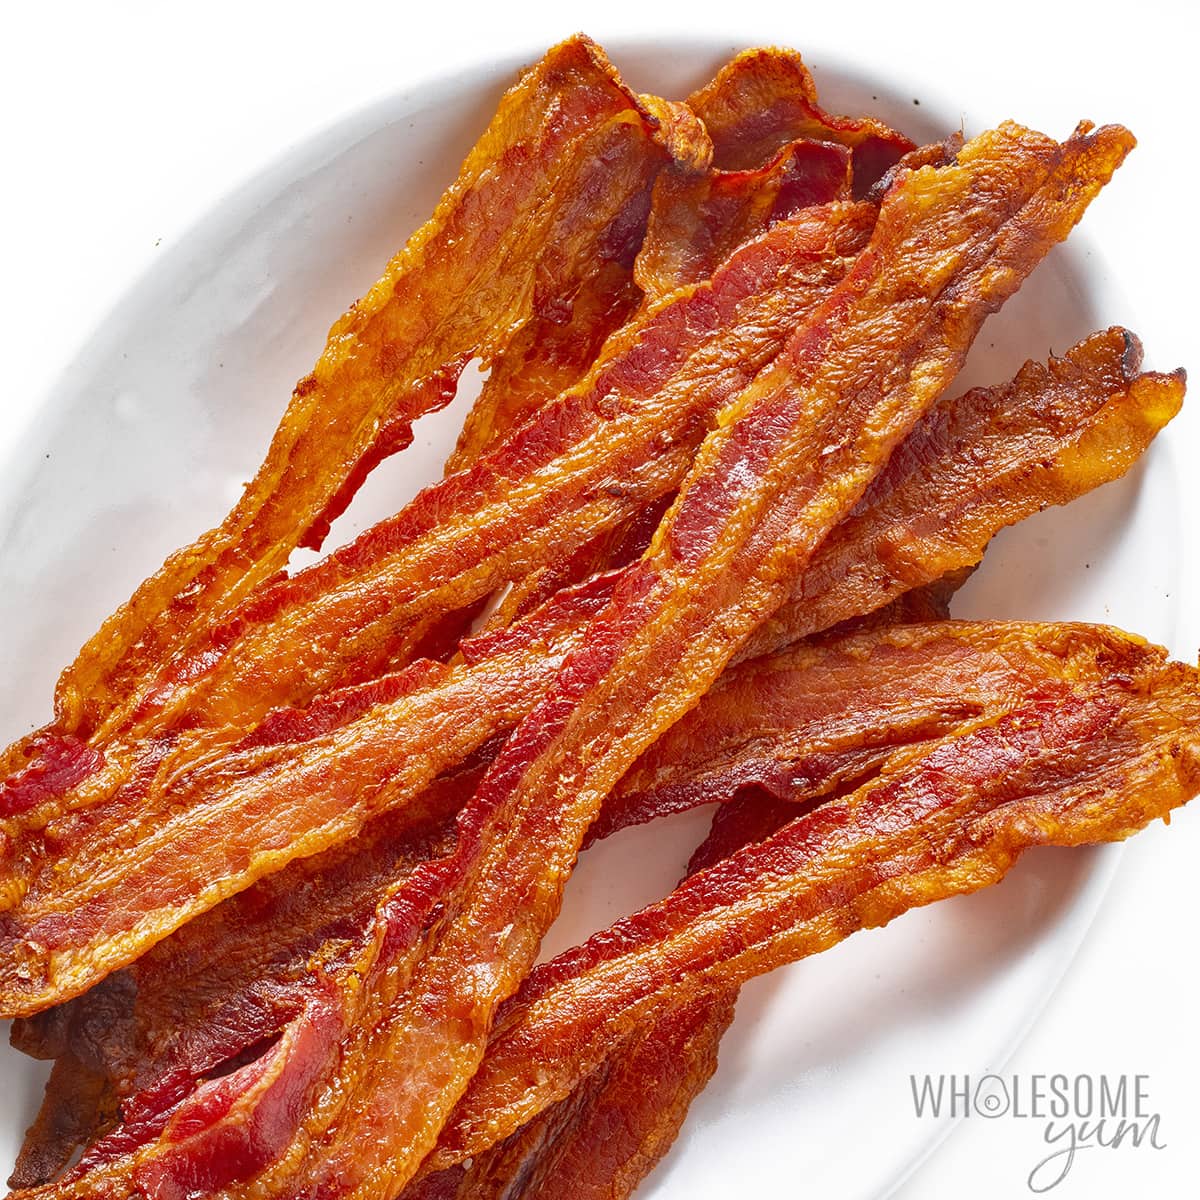 Crispy baked bacon in the oven, on a plate.